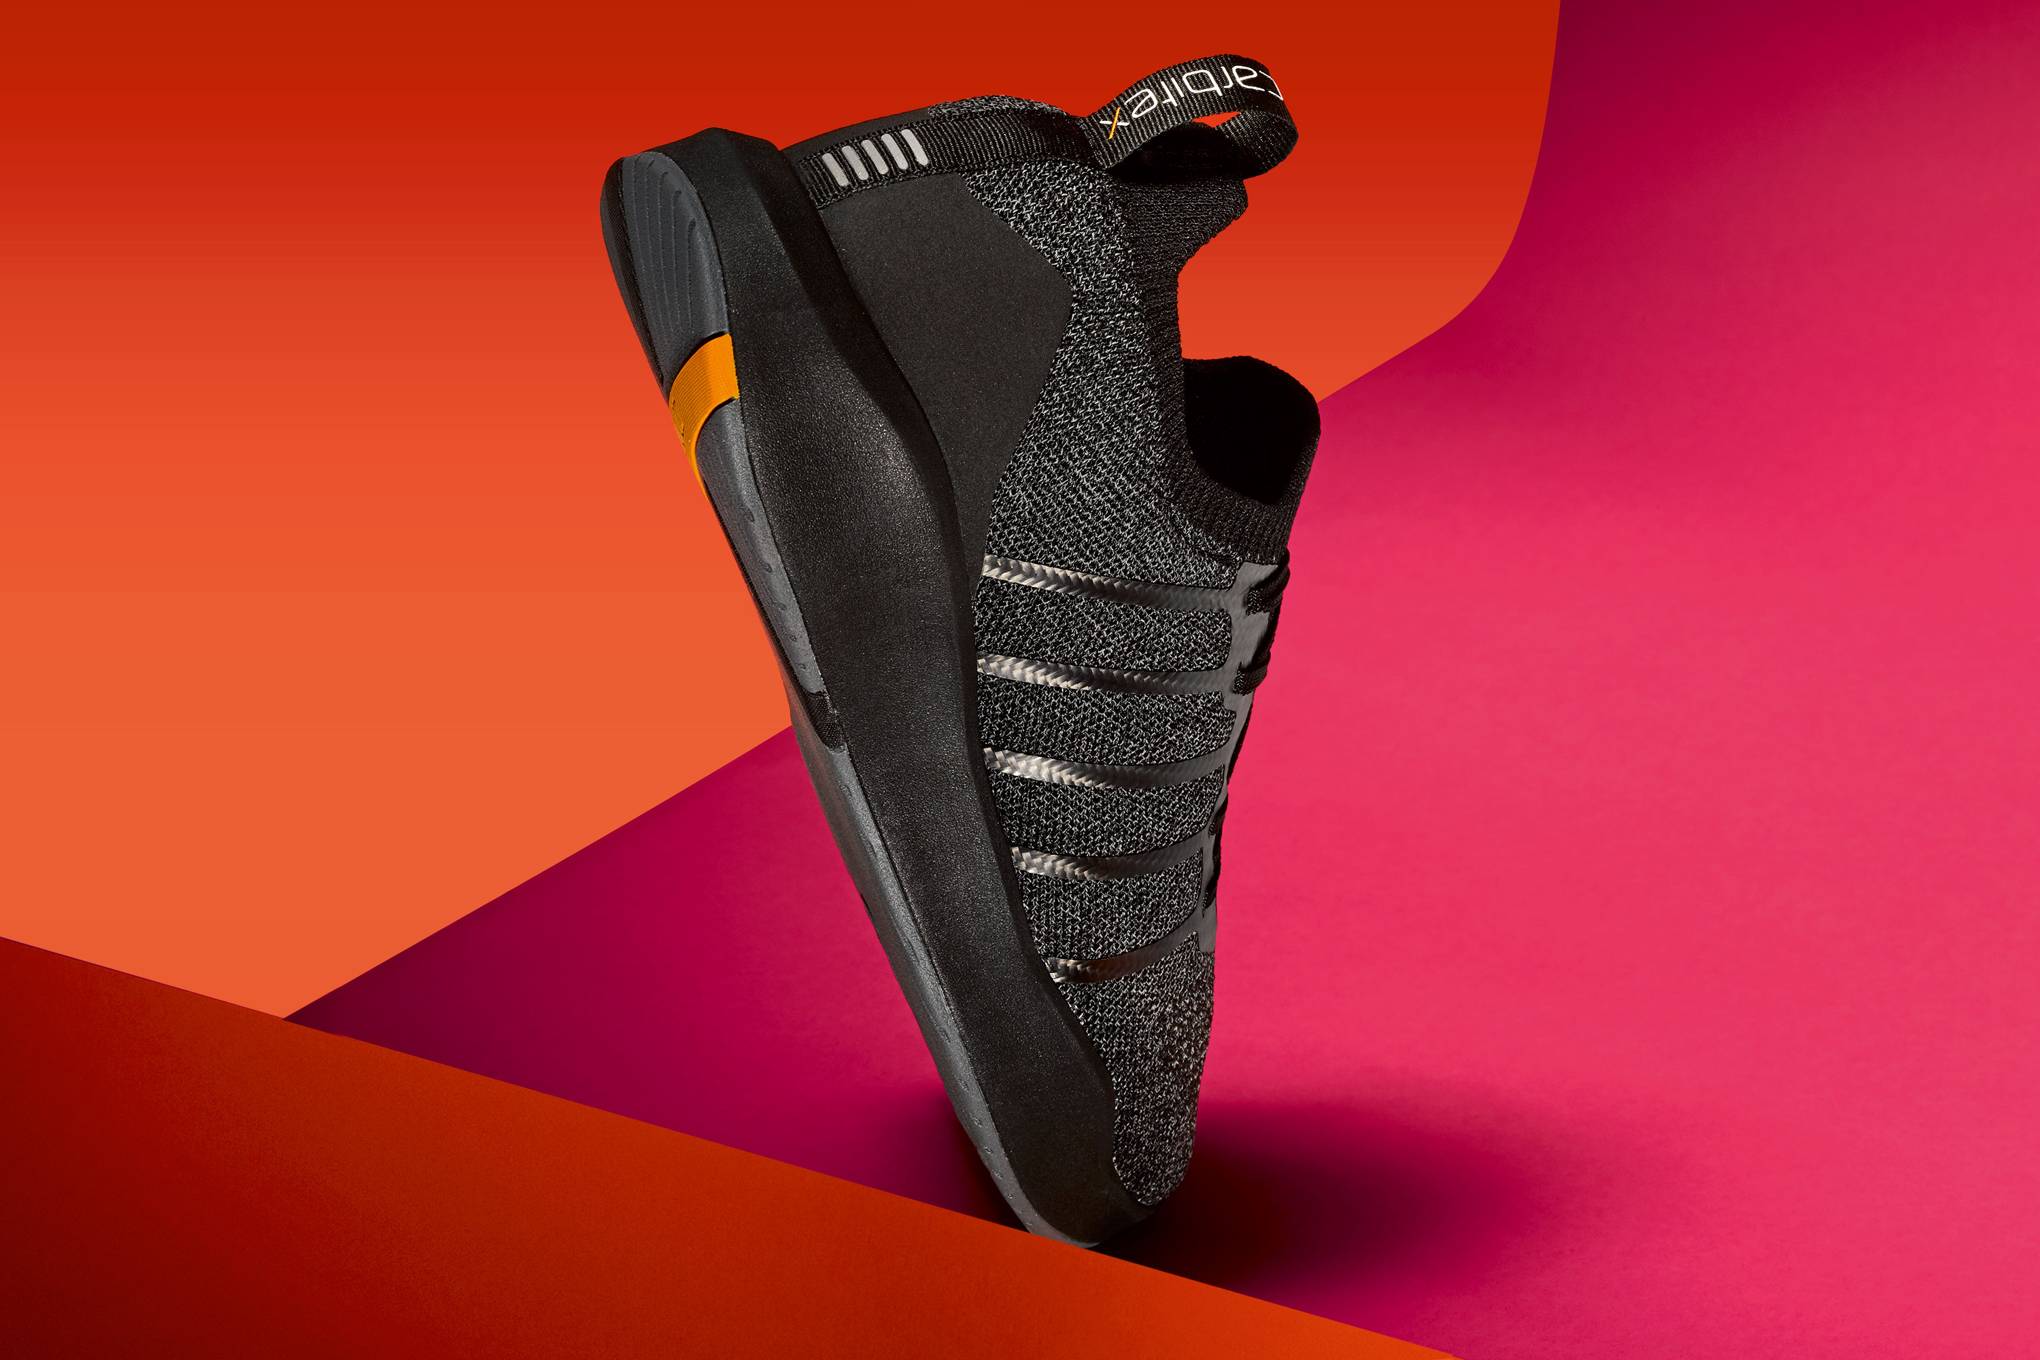 These carbon fibre shoes are coming for 